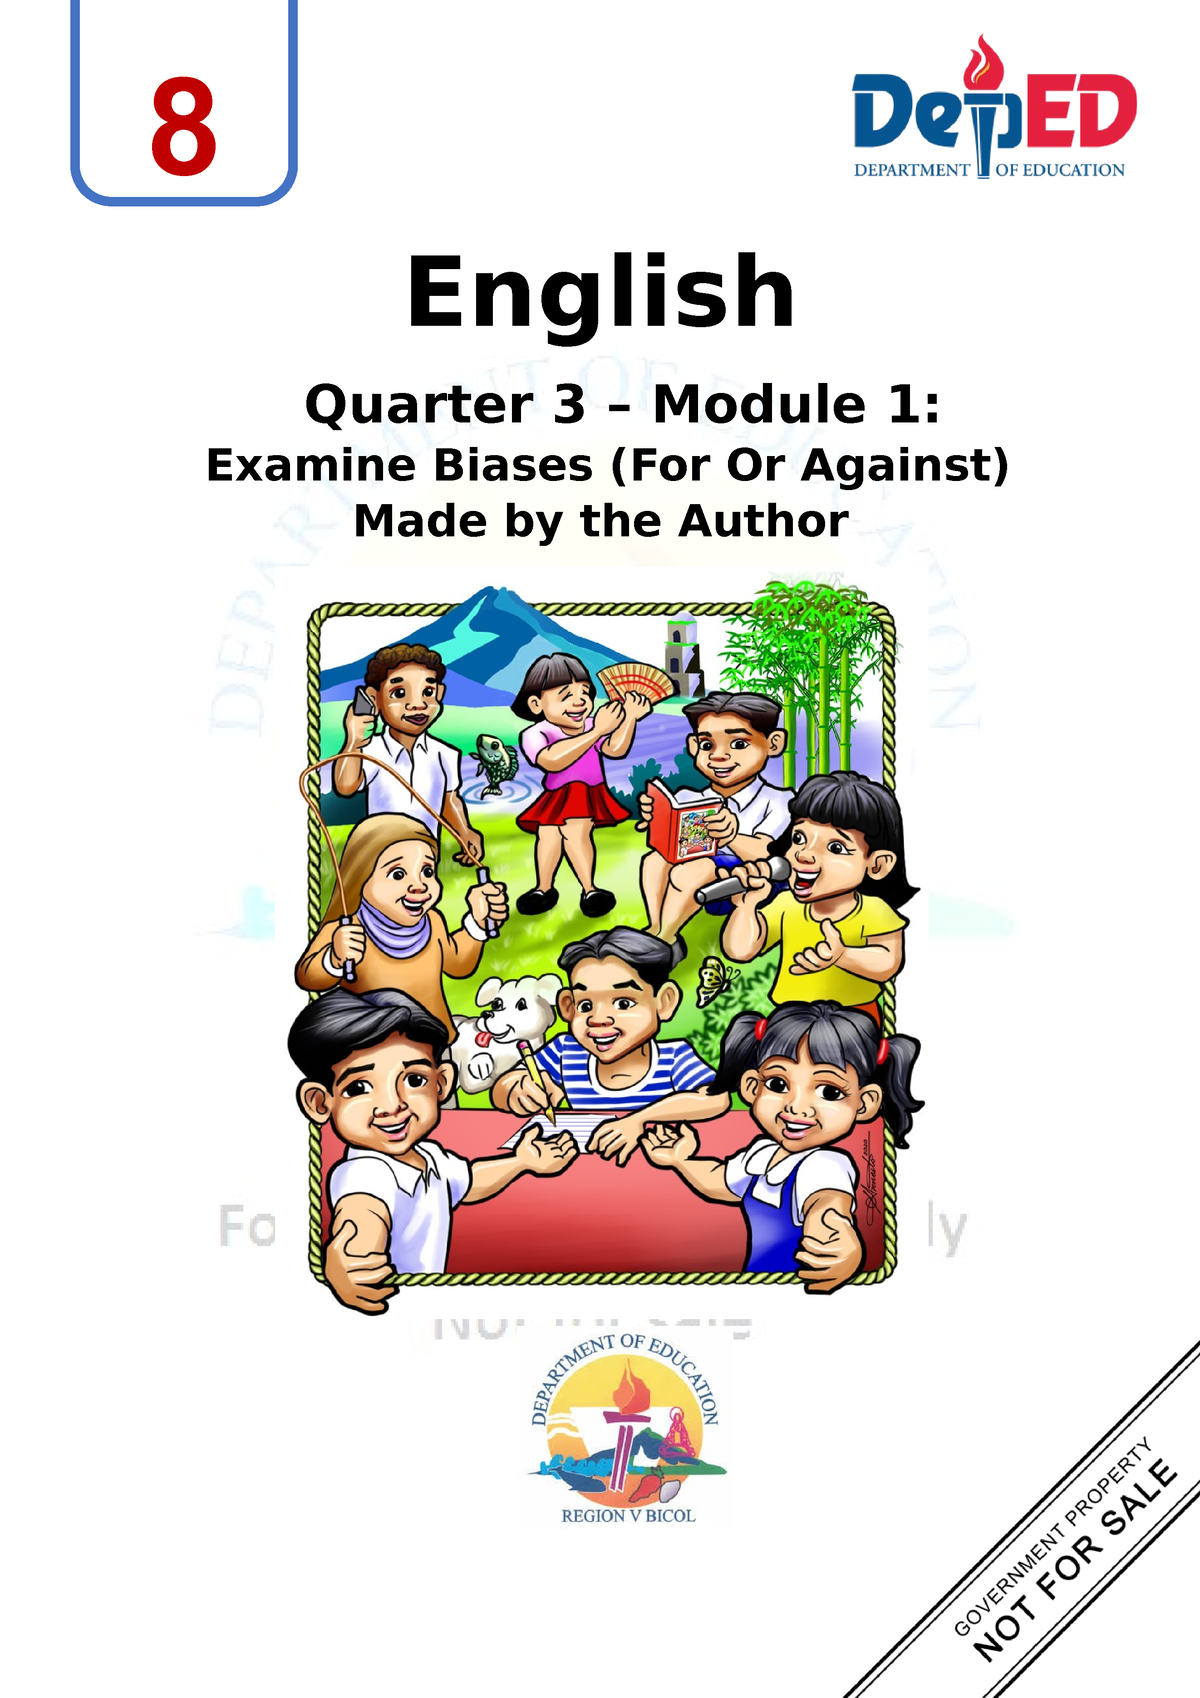 English 8 Quarter 3 Module 1 English Quarter 3 Module 1 Examine Biases For Or Against 4983